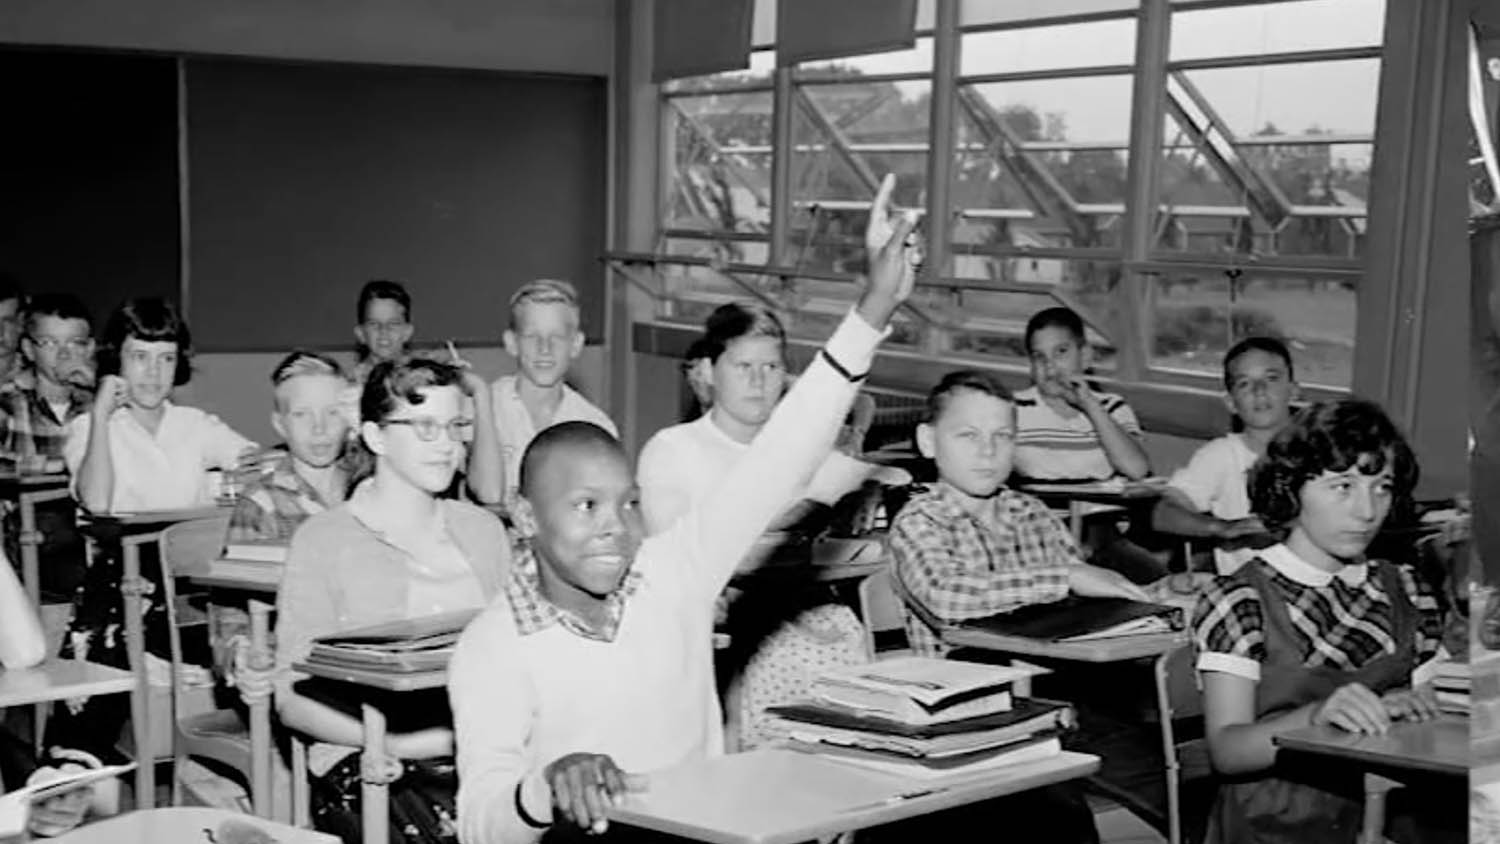 students in a classroom in the 1950s